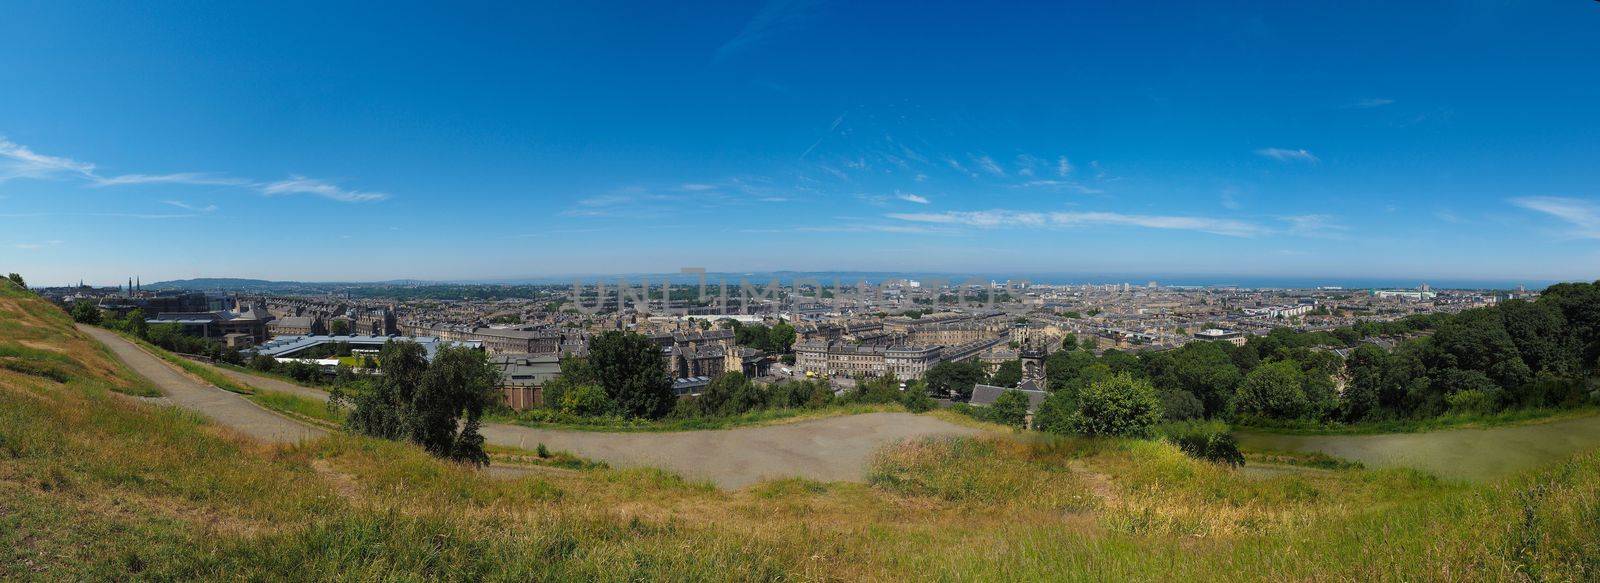 Large high resolution panoramic aerial view of the city of Edinburgh, UK